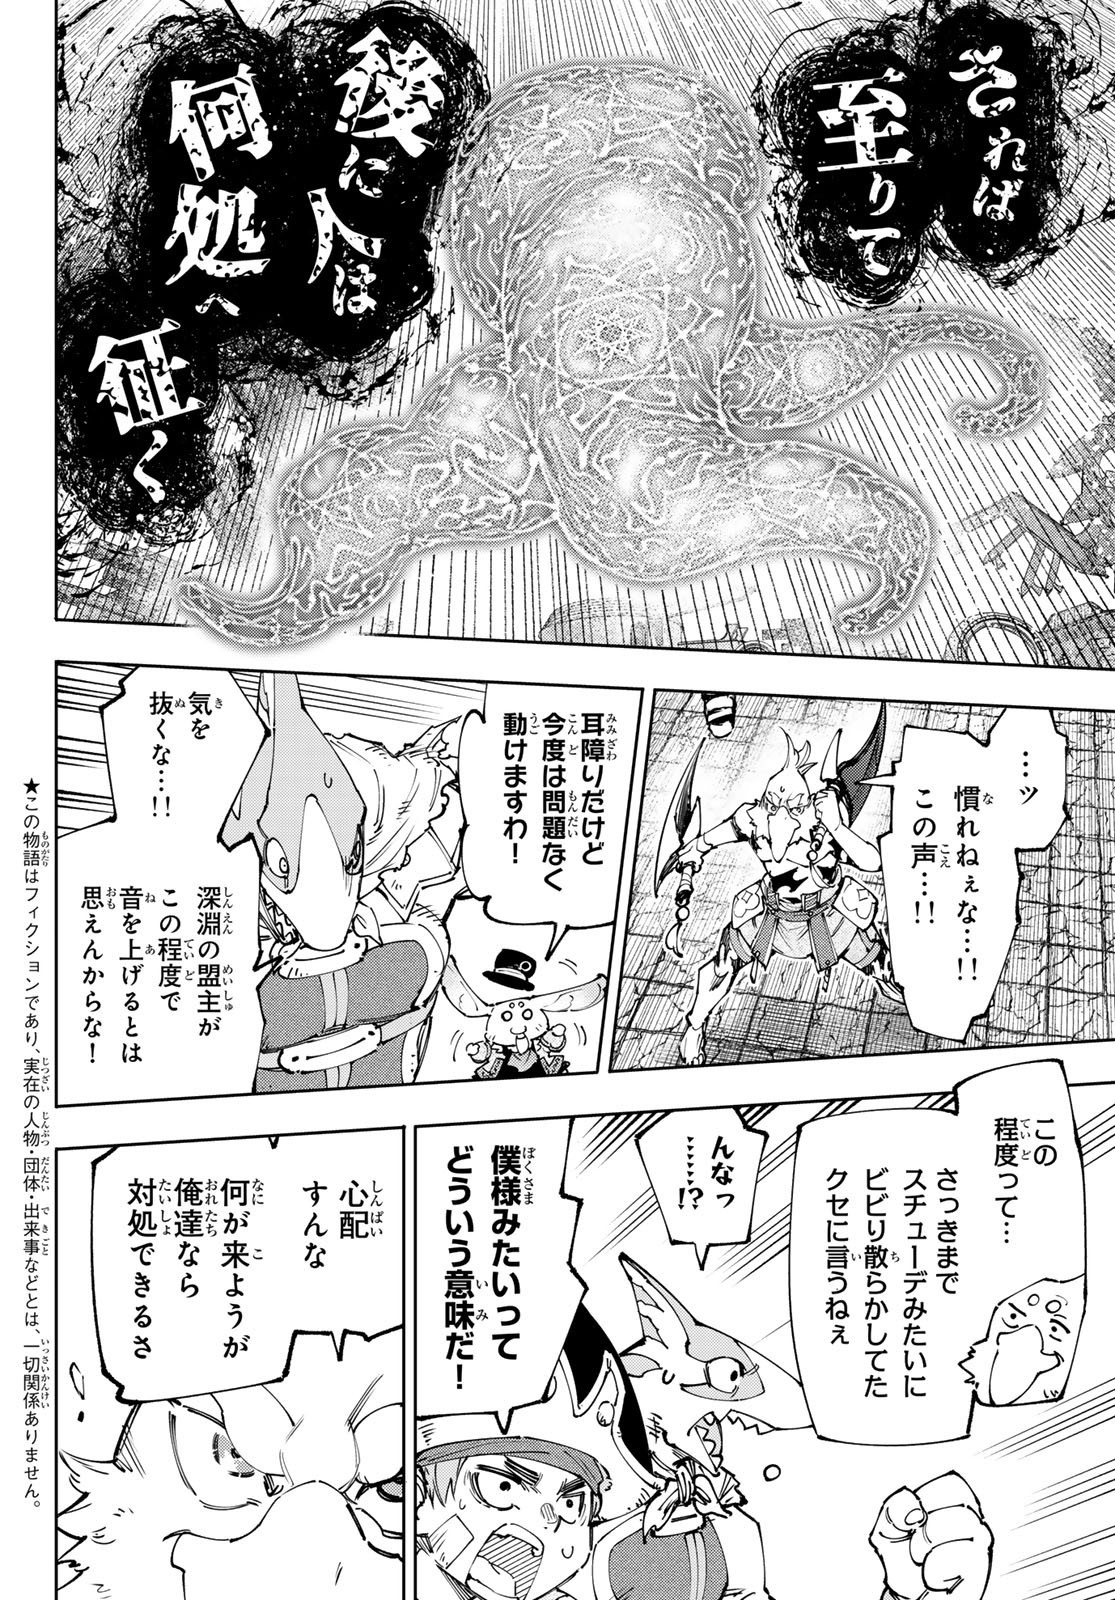 Weekly Shōnen Magazine - 週刊少年マガジン - Chapter 2024-32 - Page 80